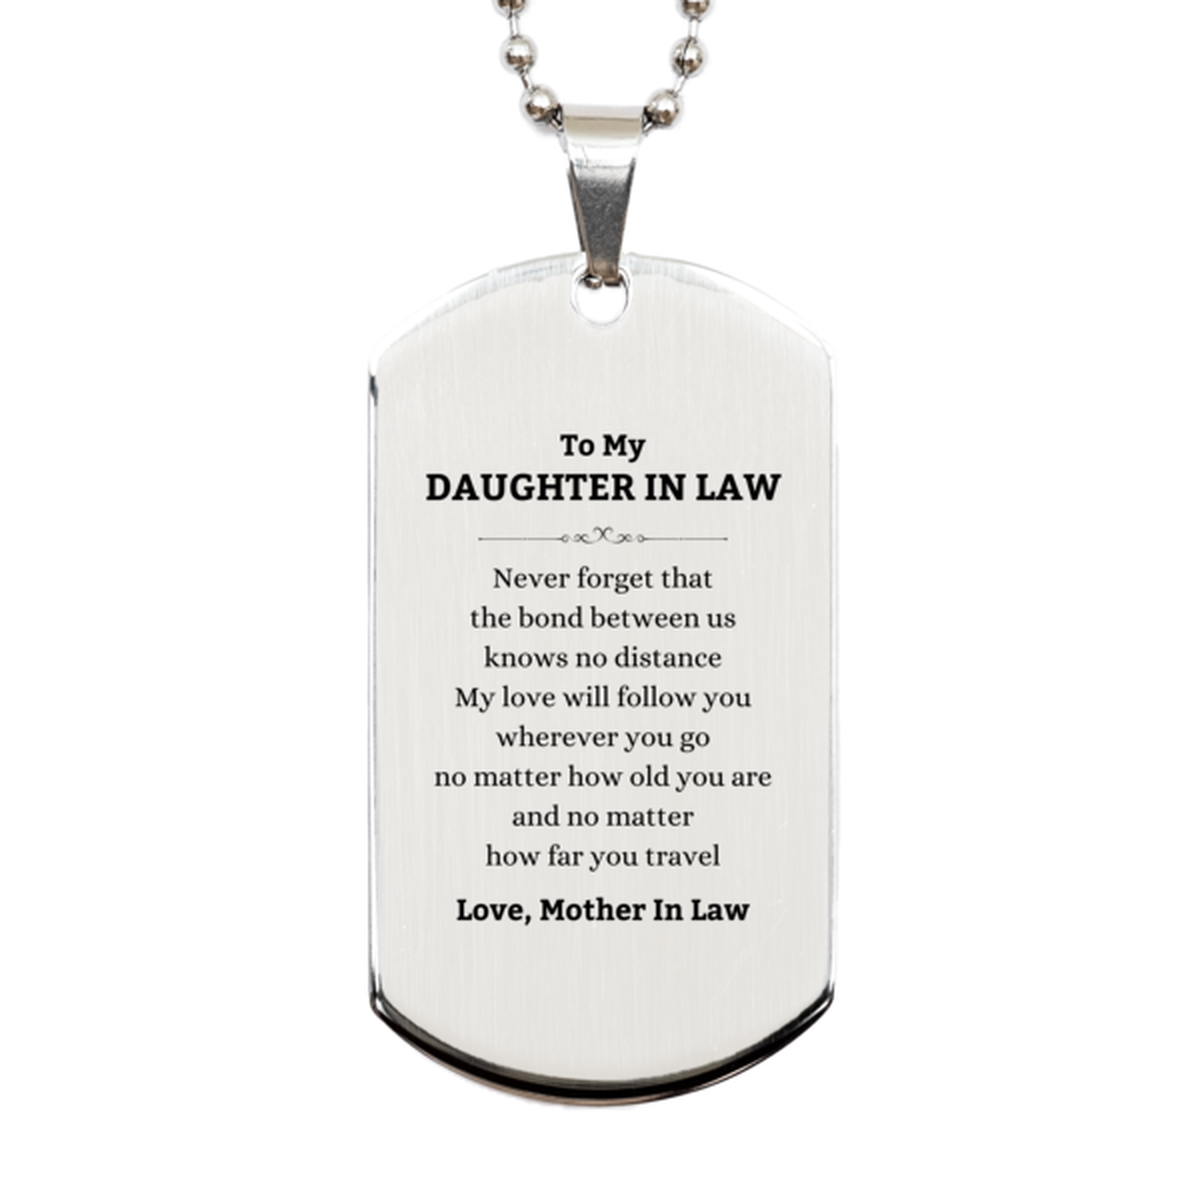 Daughter In Law Birthday Gifts from Mother In Law, Adjustable Silver Dog Tag for Daughter In Law Christmas Graduation Unique Gifts Daughter In Law Never forget that the bond between us knows no distance. Love, Mother In Law